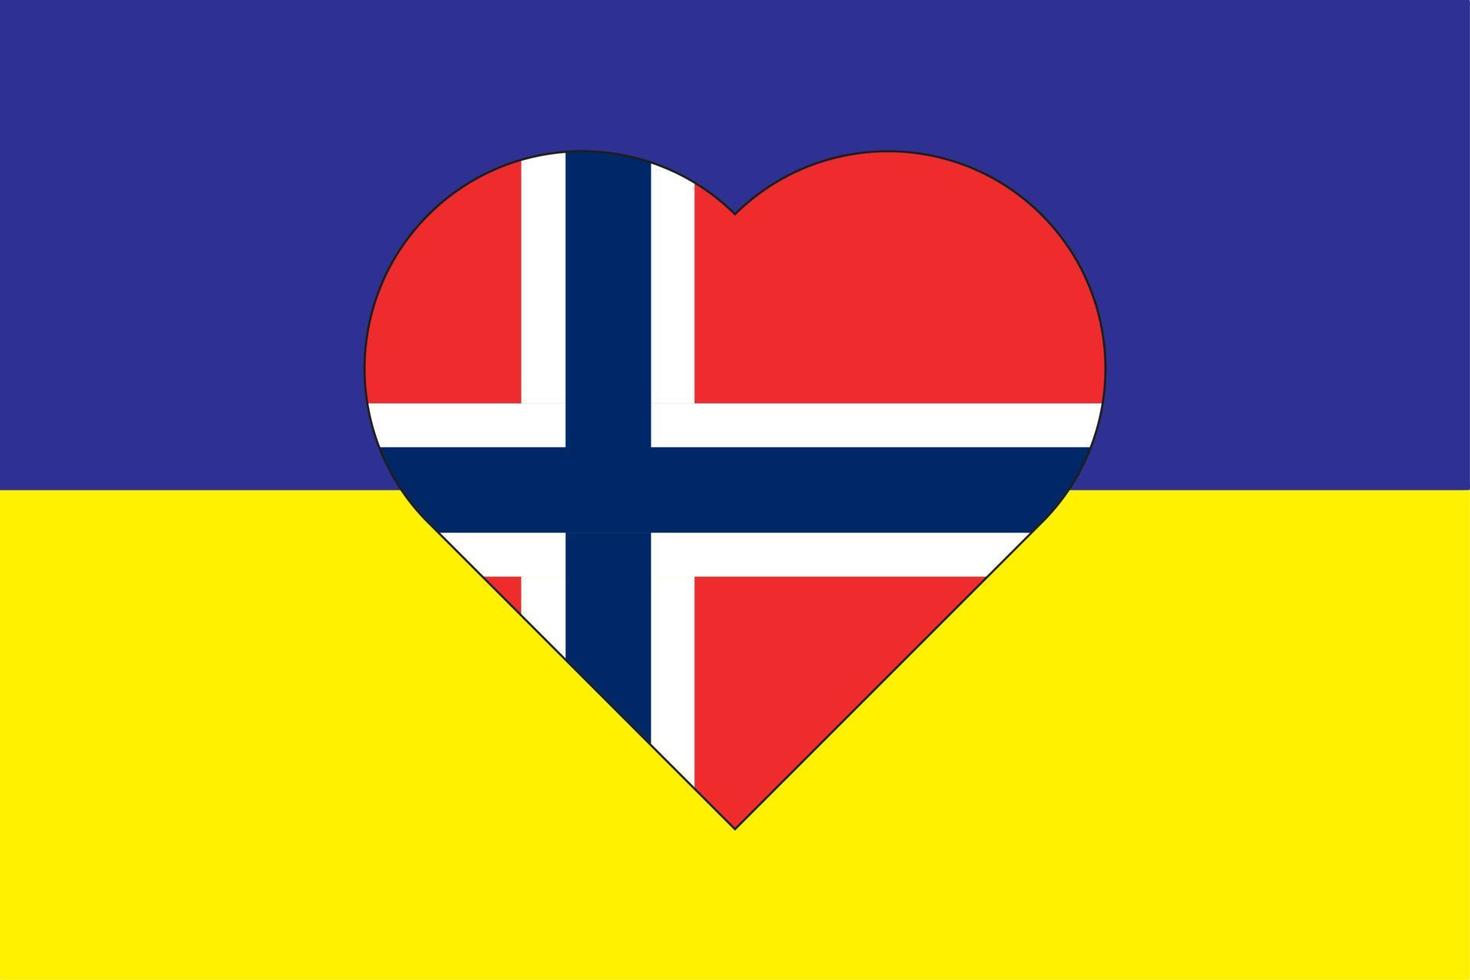 Heart painted in the colors of the flag of Norway on the flag of Ukraine. Vector illustration of a heart with the national symbol of Norway on a blue-yellow background.